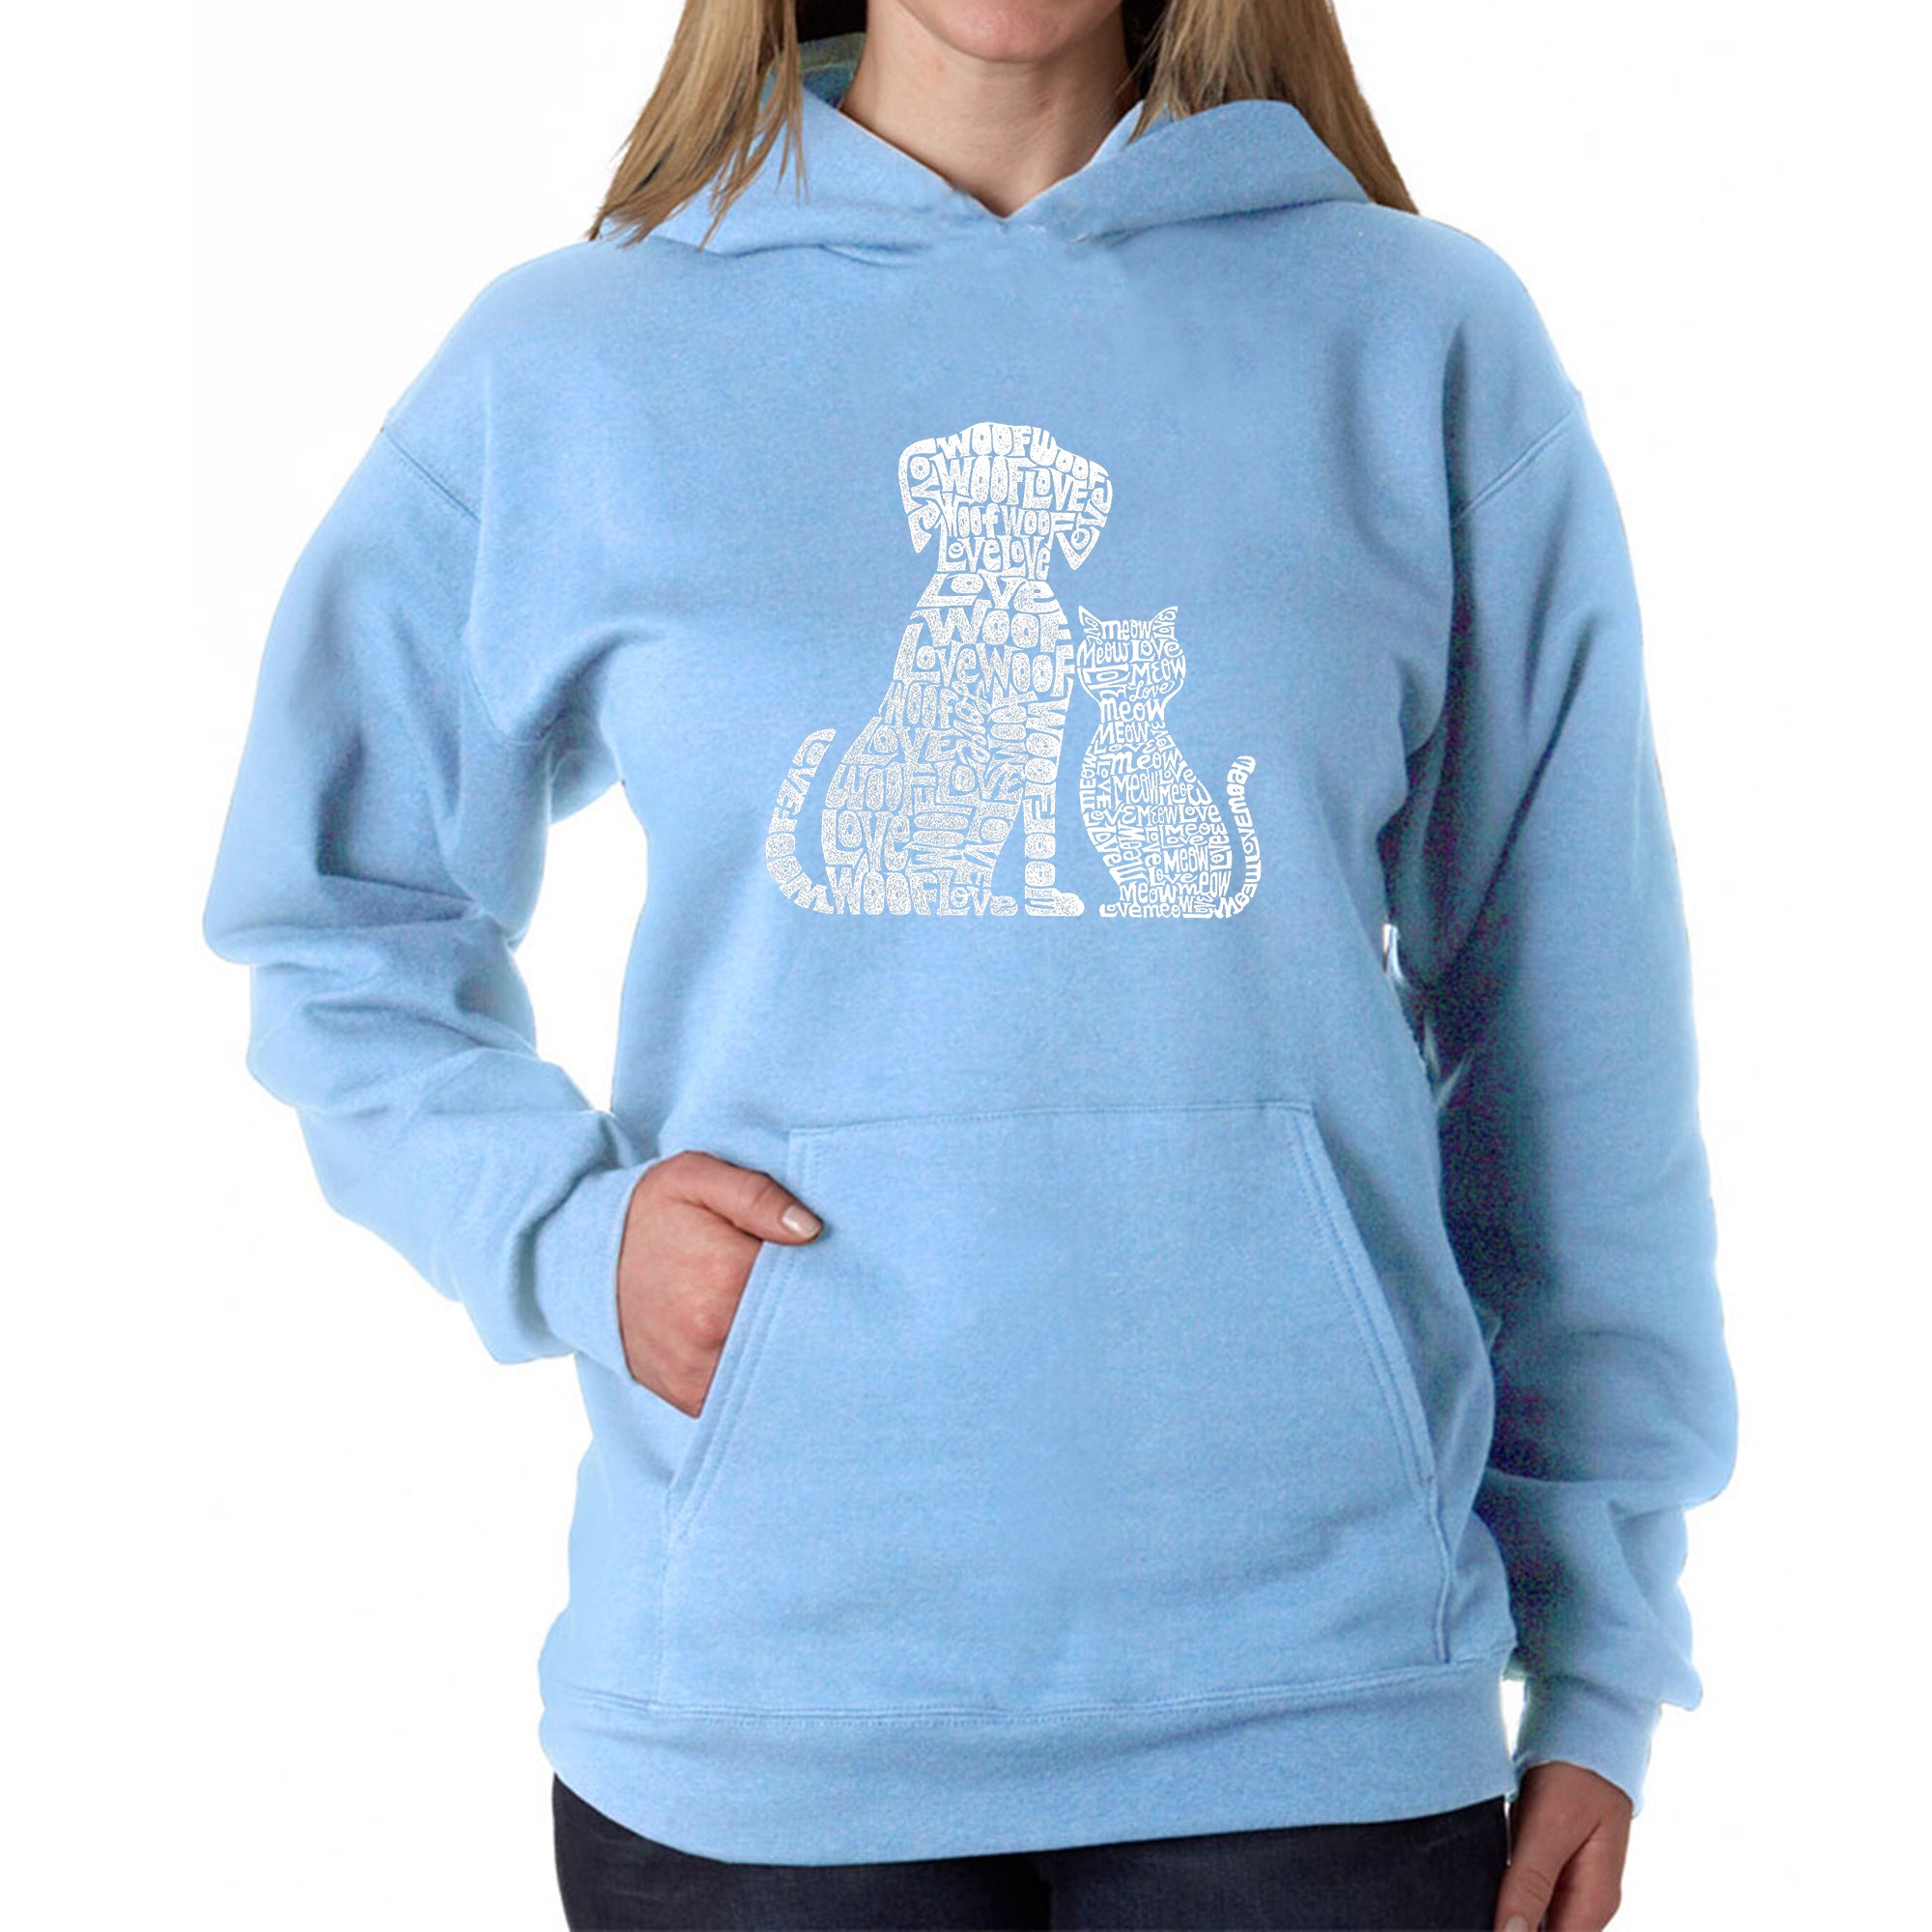 Dogs And Cats - Women's Word Art Hooded Sweatshirt - Blue - XX-Large